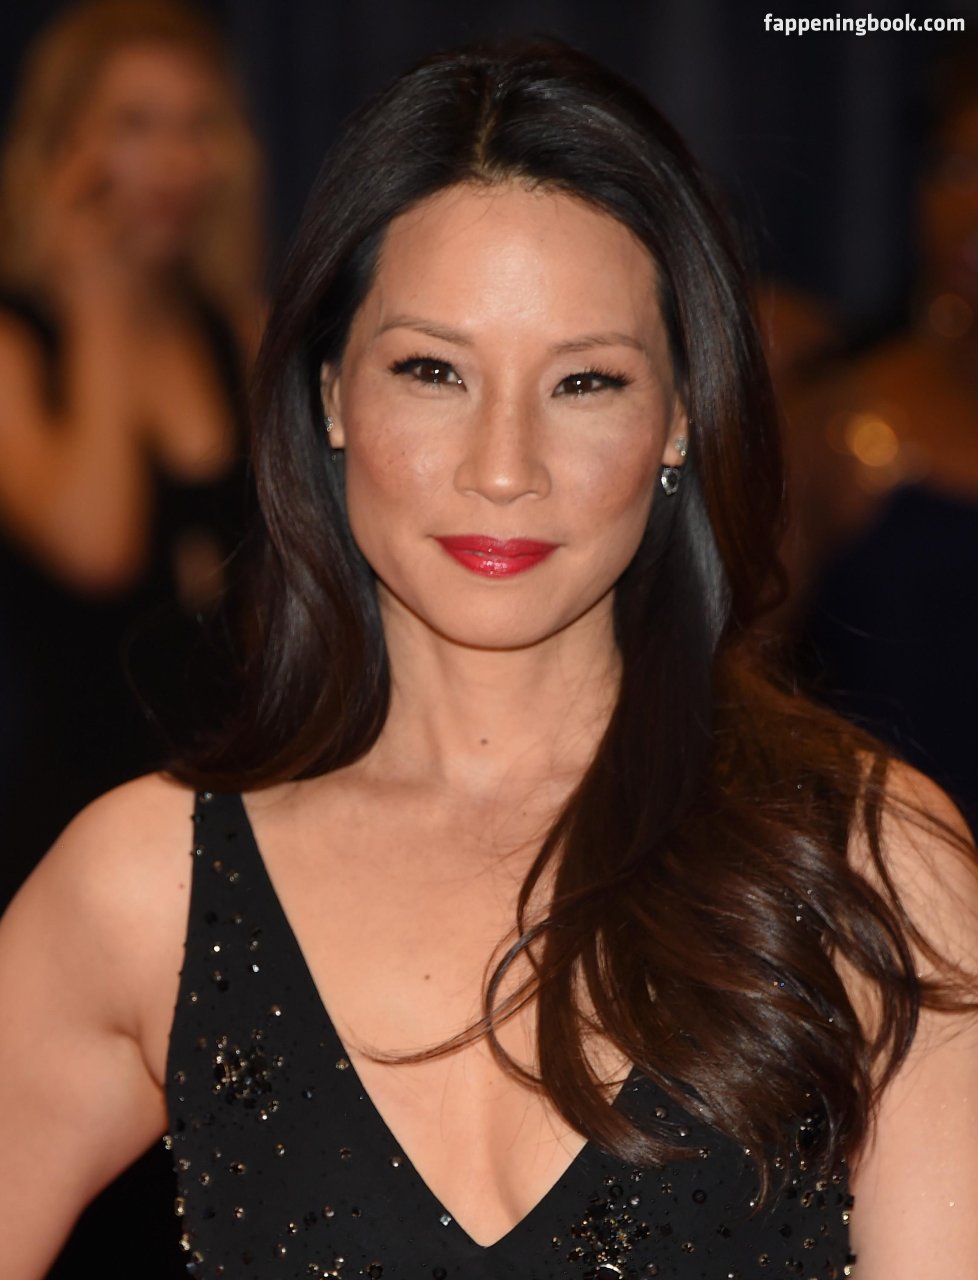 Lucy Liu Nude The Fappening Photo Fappeningbook